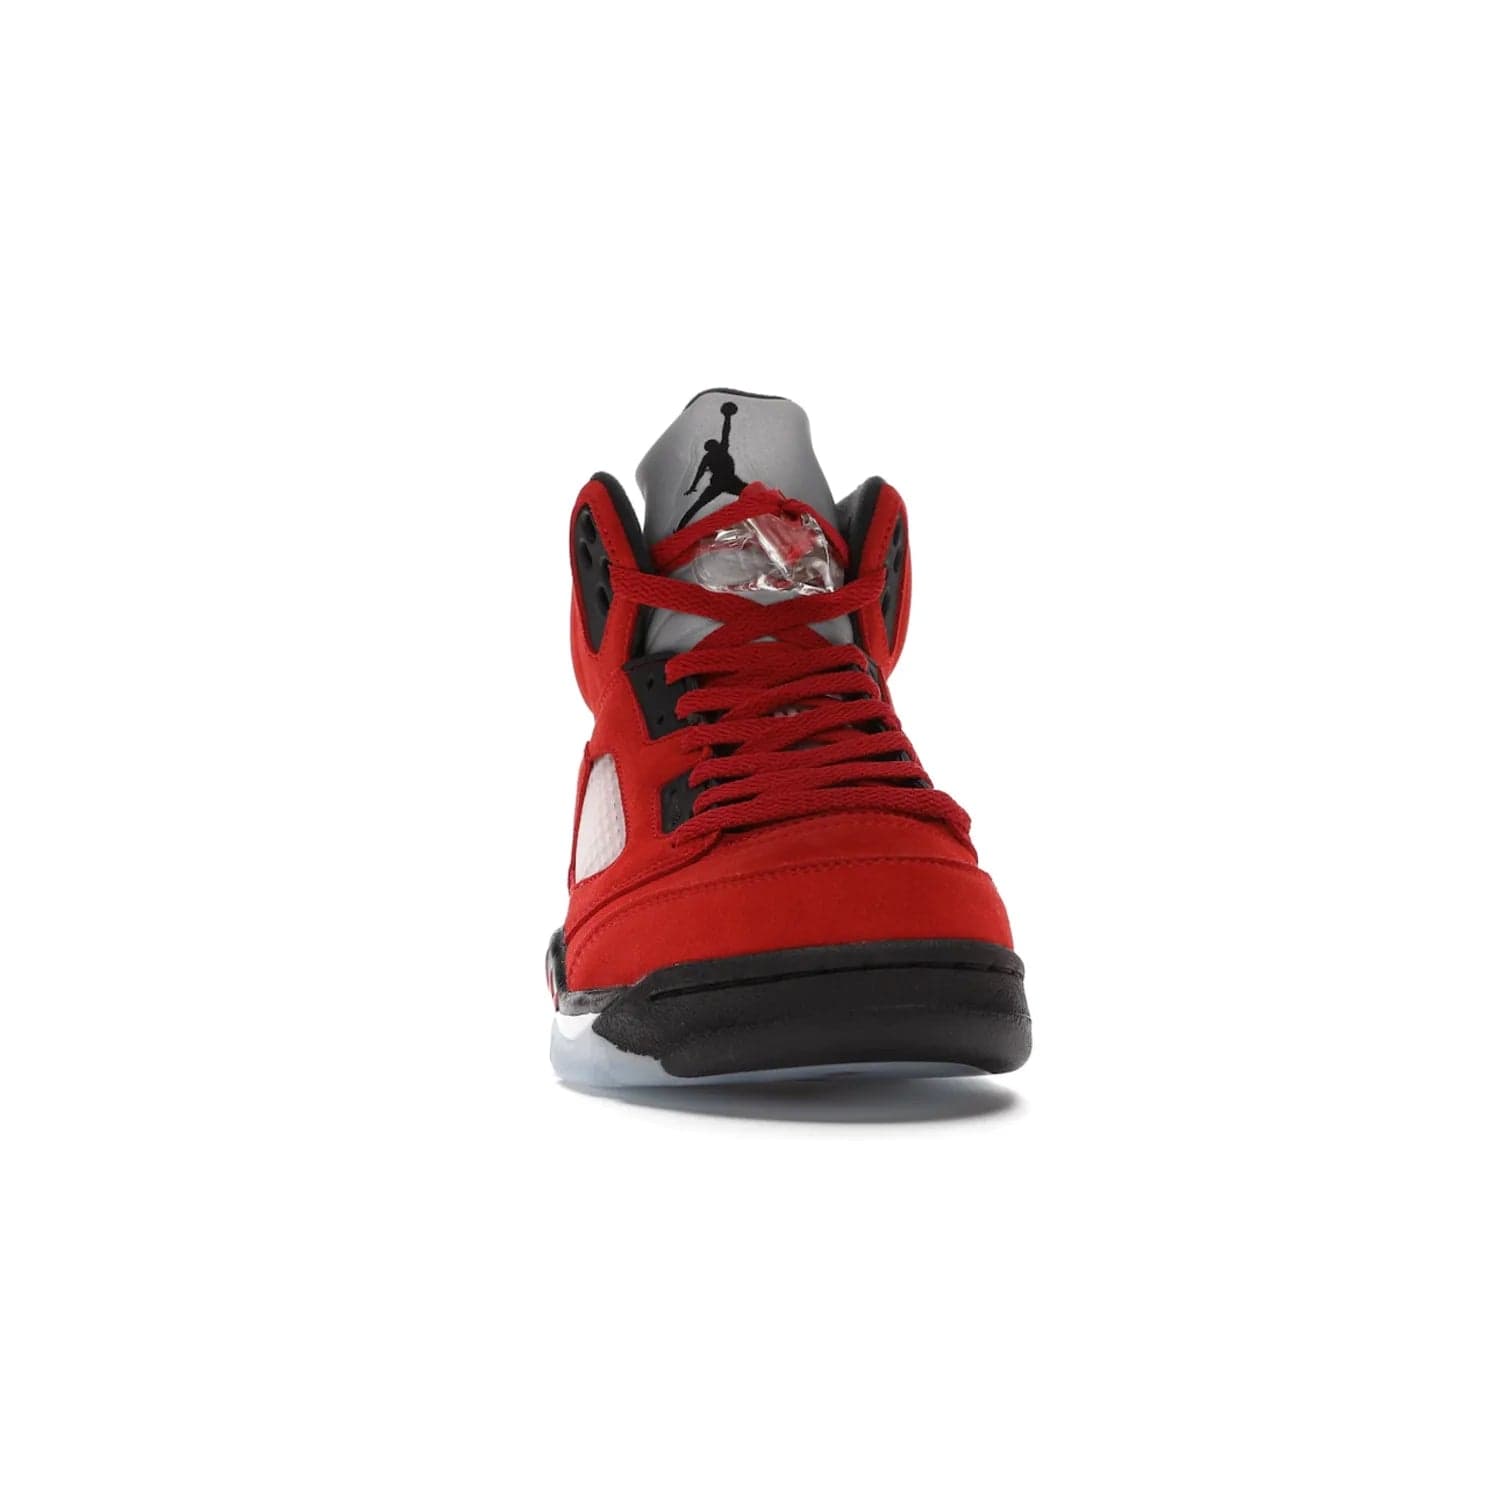 Jordan 5 Retro Raging Bull Red (2021) - Image 9 - Only at www.BallersClubKickz.com - Get ready for the 2021 stand-alone release of the Air Jordan 5 Raging Bulls! This all-suede upper combines luxe details like a Jumpman logo, red & black "23" embroidery and shark tooth detailing, atop a black midsole. Don't miss out - release date in April 2021 for $190.